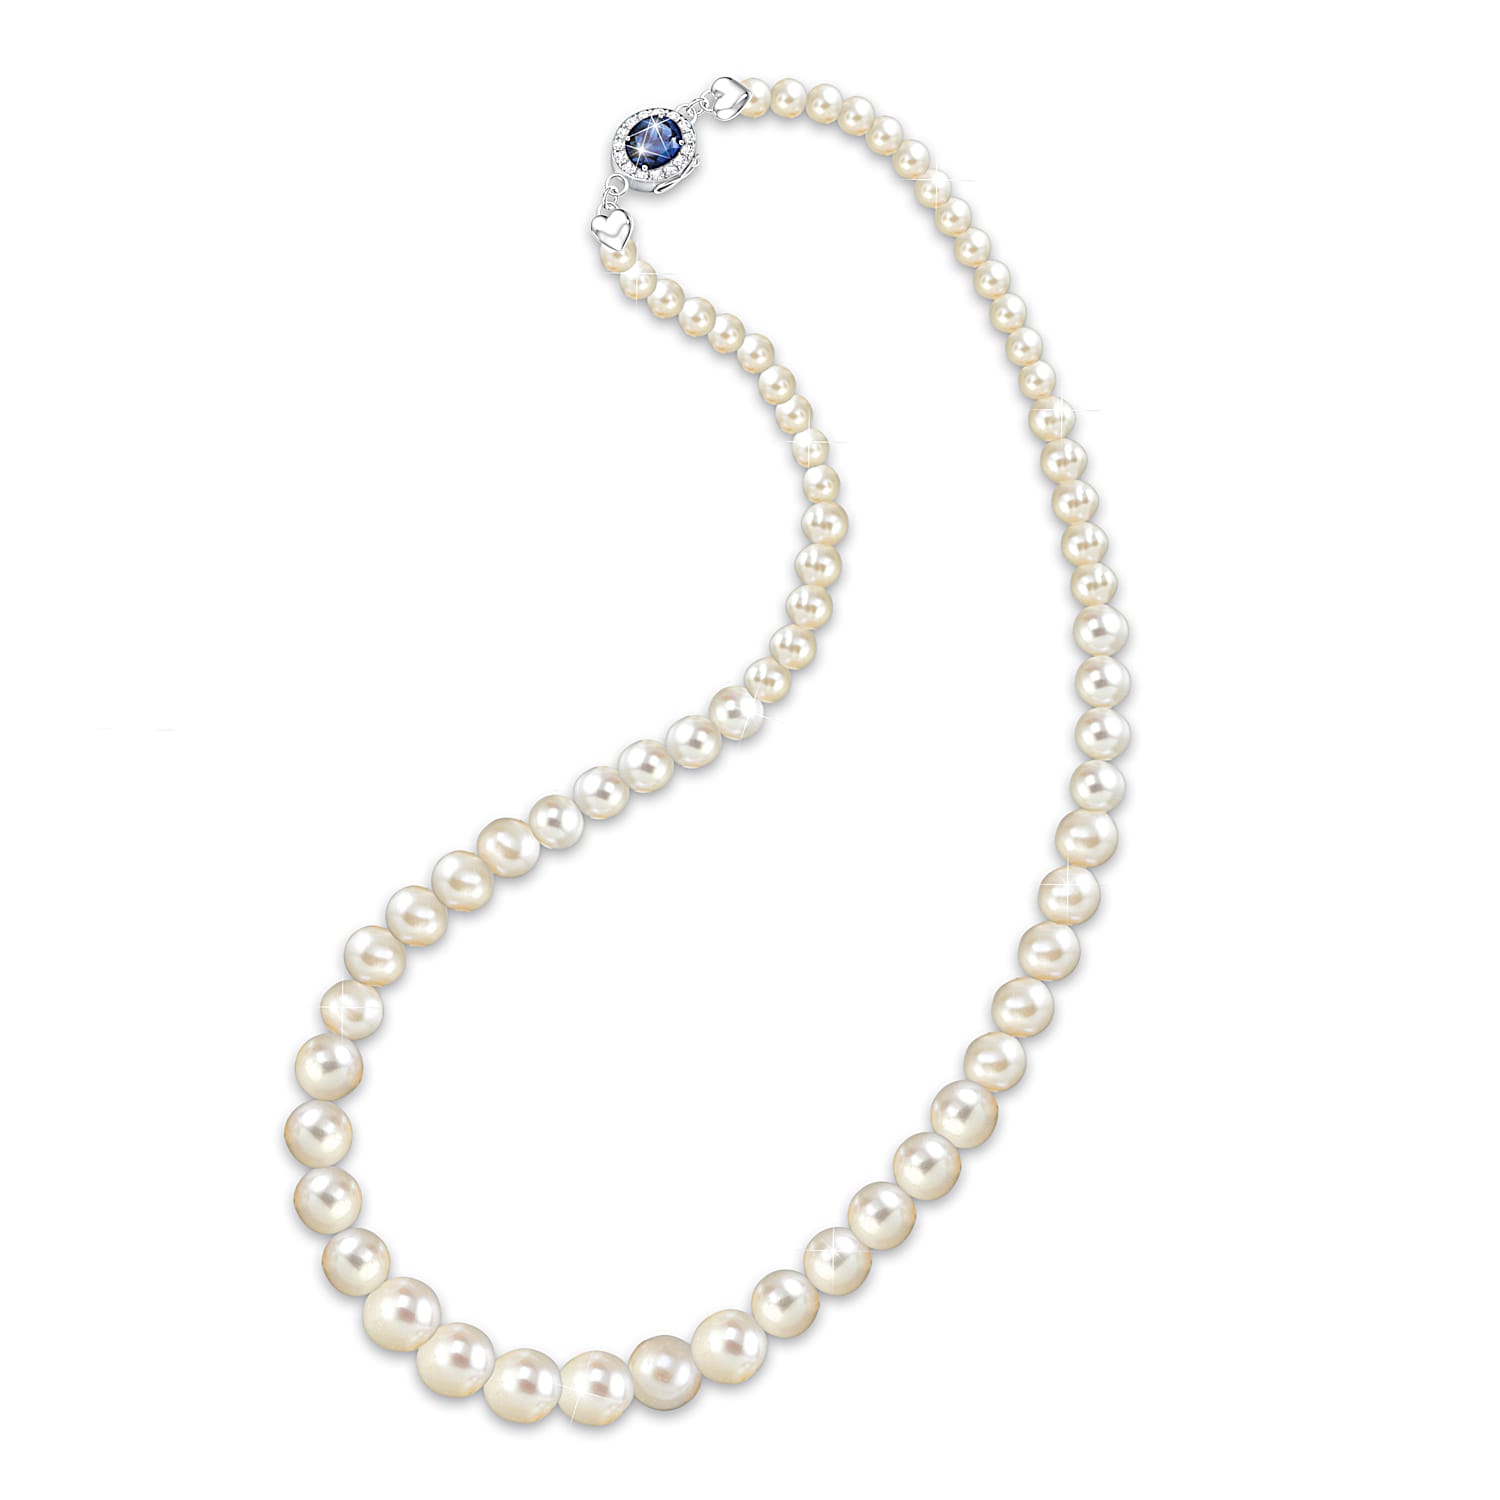 Pearls Of Wisdom Sterling Silver Plated Mother-Of-Pearl Necklace Inspired  By Princess Diana Adorned With A Simulated Sapphire And Simulated Diamonds